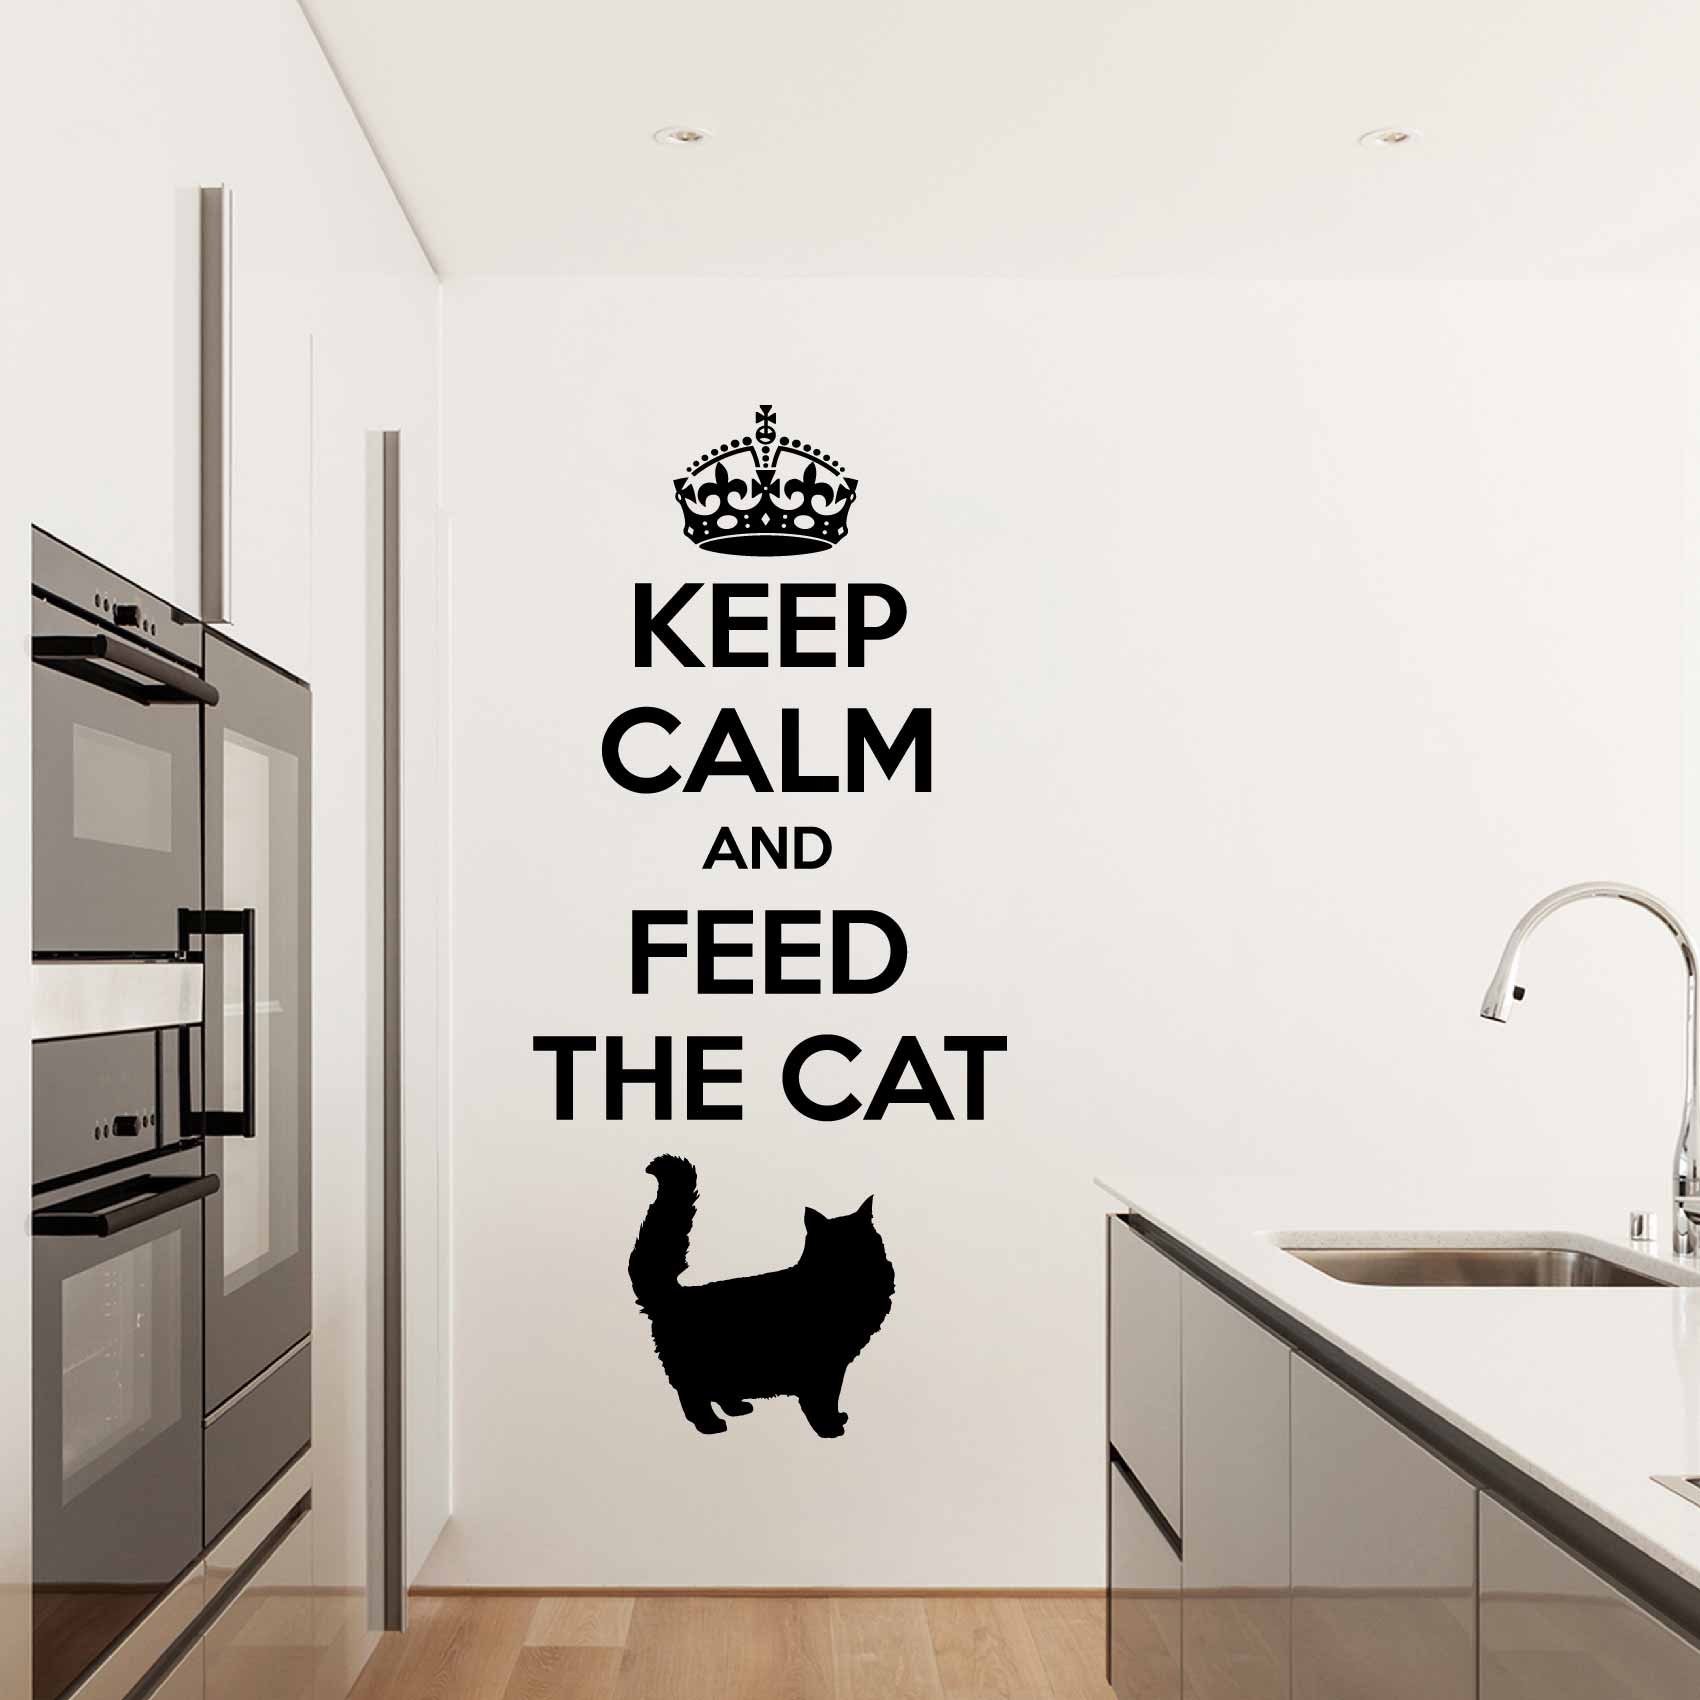 stickers-keep-calm-and-feed-the-cat-ref21chat-autocollant-chat-norvegien-deco-sticker-cuisine-stickers-muraux